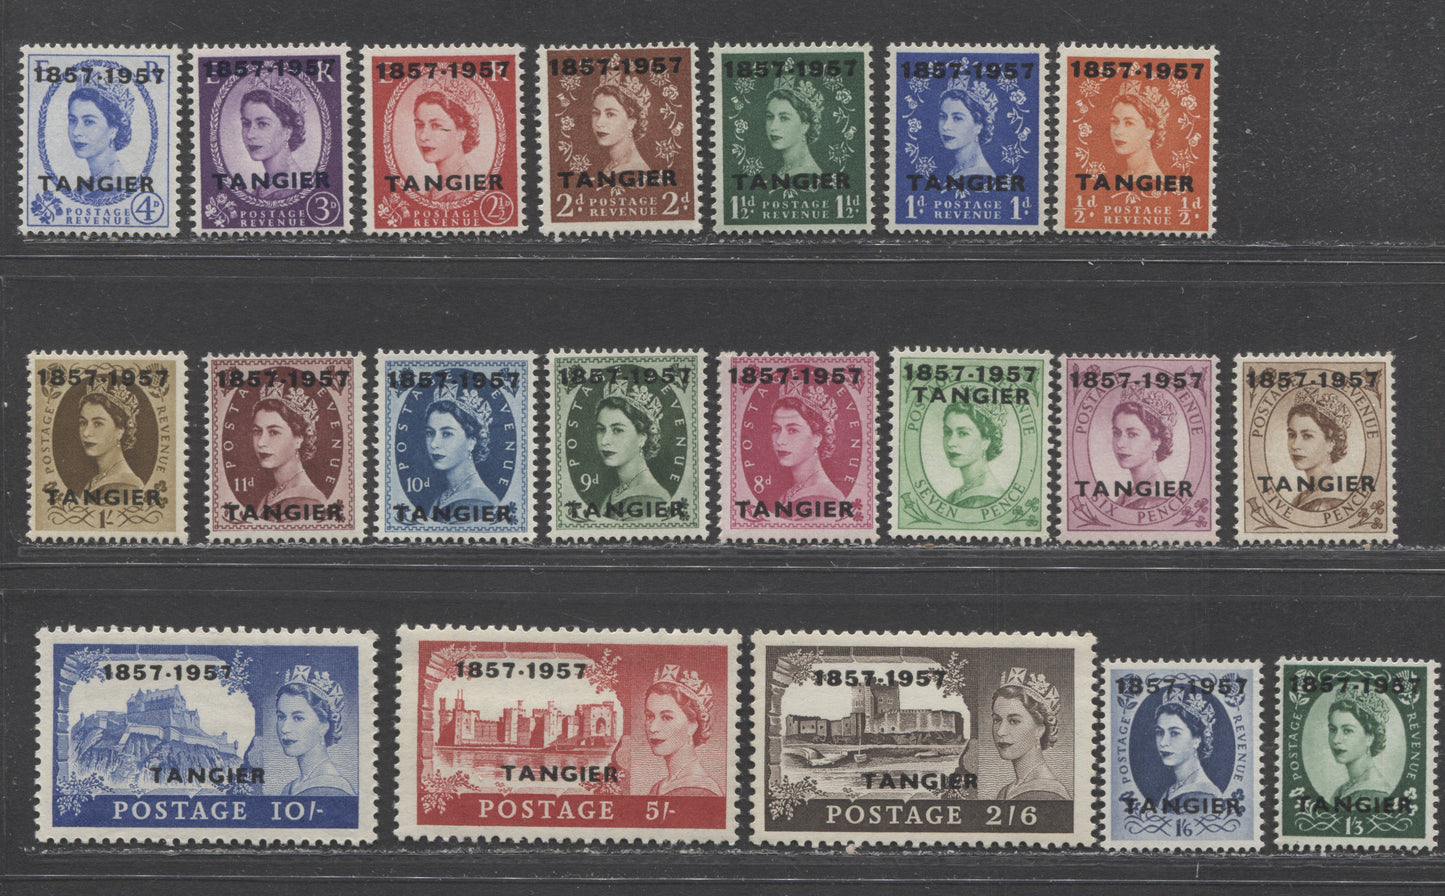 Lot 225 Morocco Agencies - Tangier SC#592-611 1957 Tangier Centenary Overprints, A F/VFNH Range Of Singles, 2017 Scott Cat. $15.2 USD, Click on Listing to See ALL Pictures